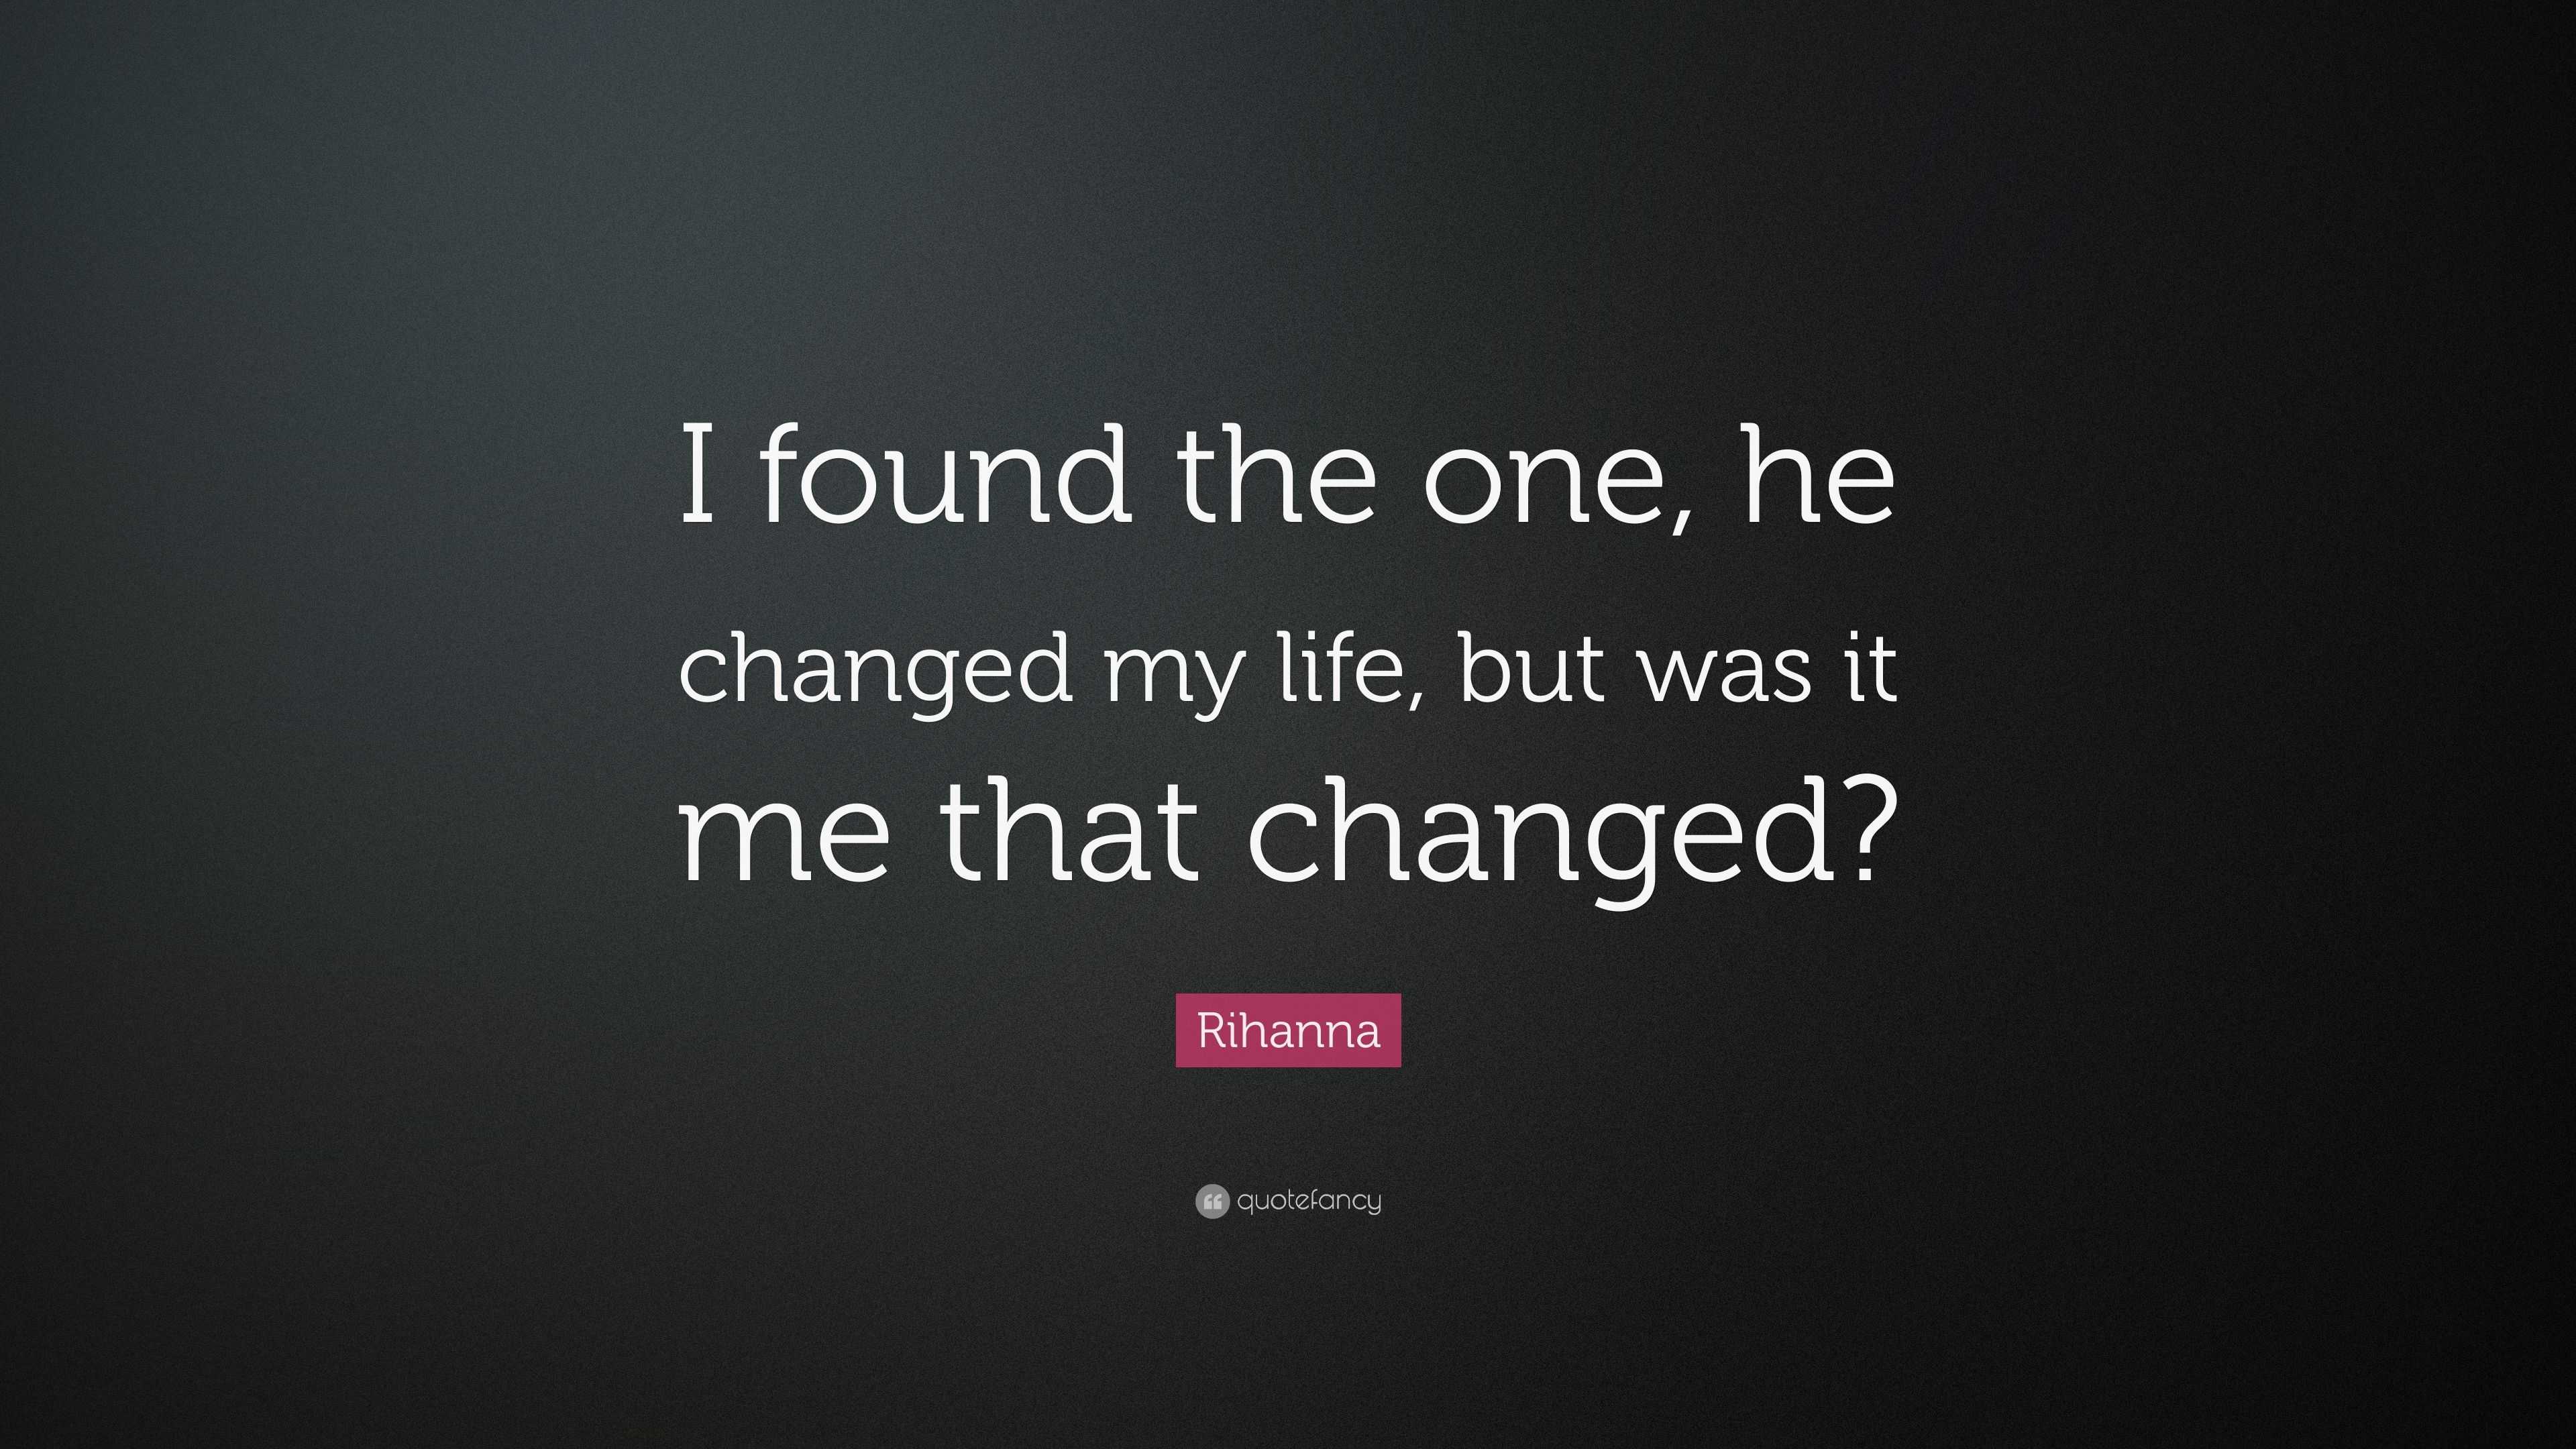 Rihanna Quote “I found the one he changed my life but was